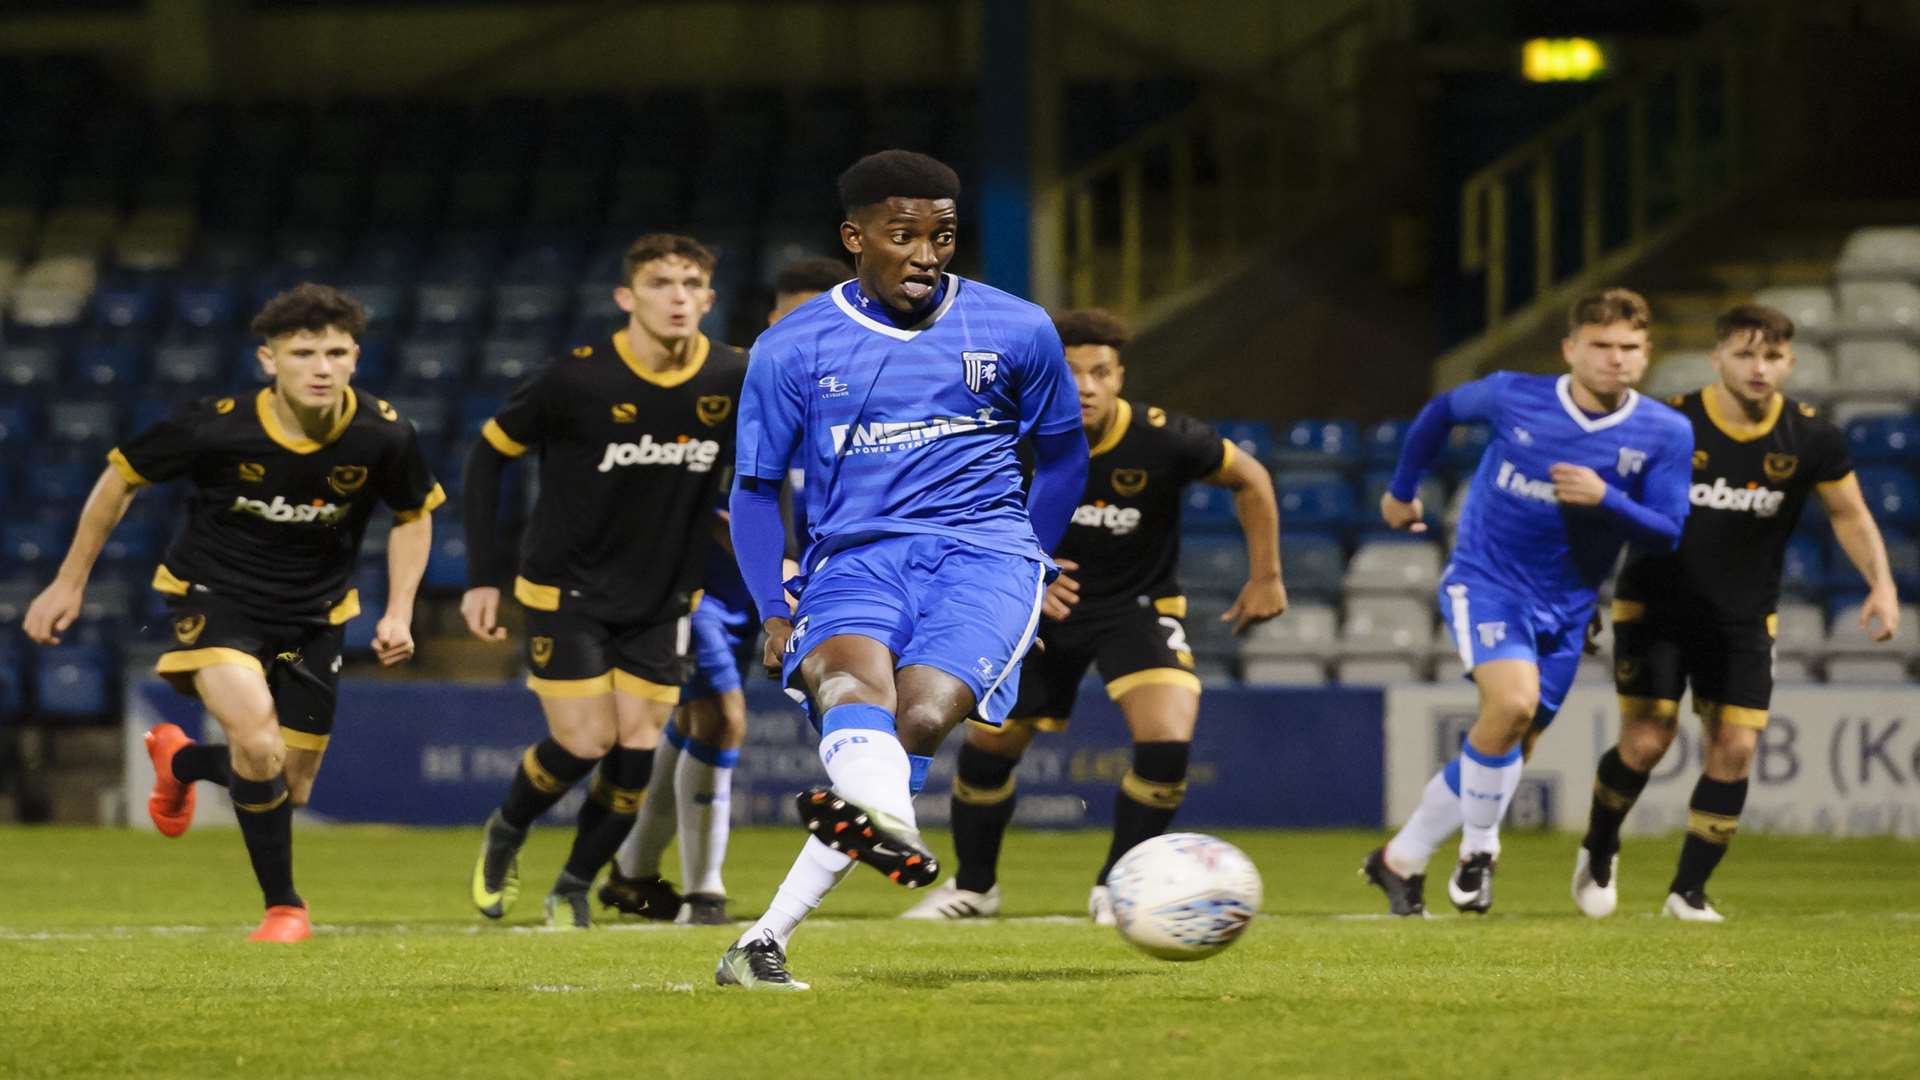 Leroy Hlabi takes a penalty for Gillingham youth. Picture: Andy Payton